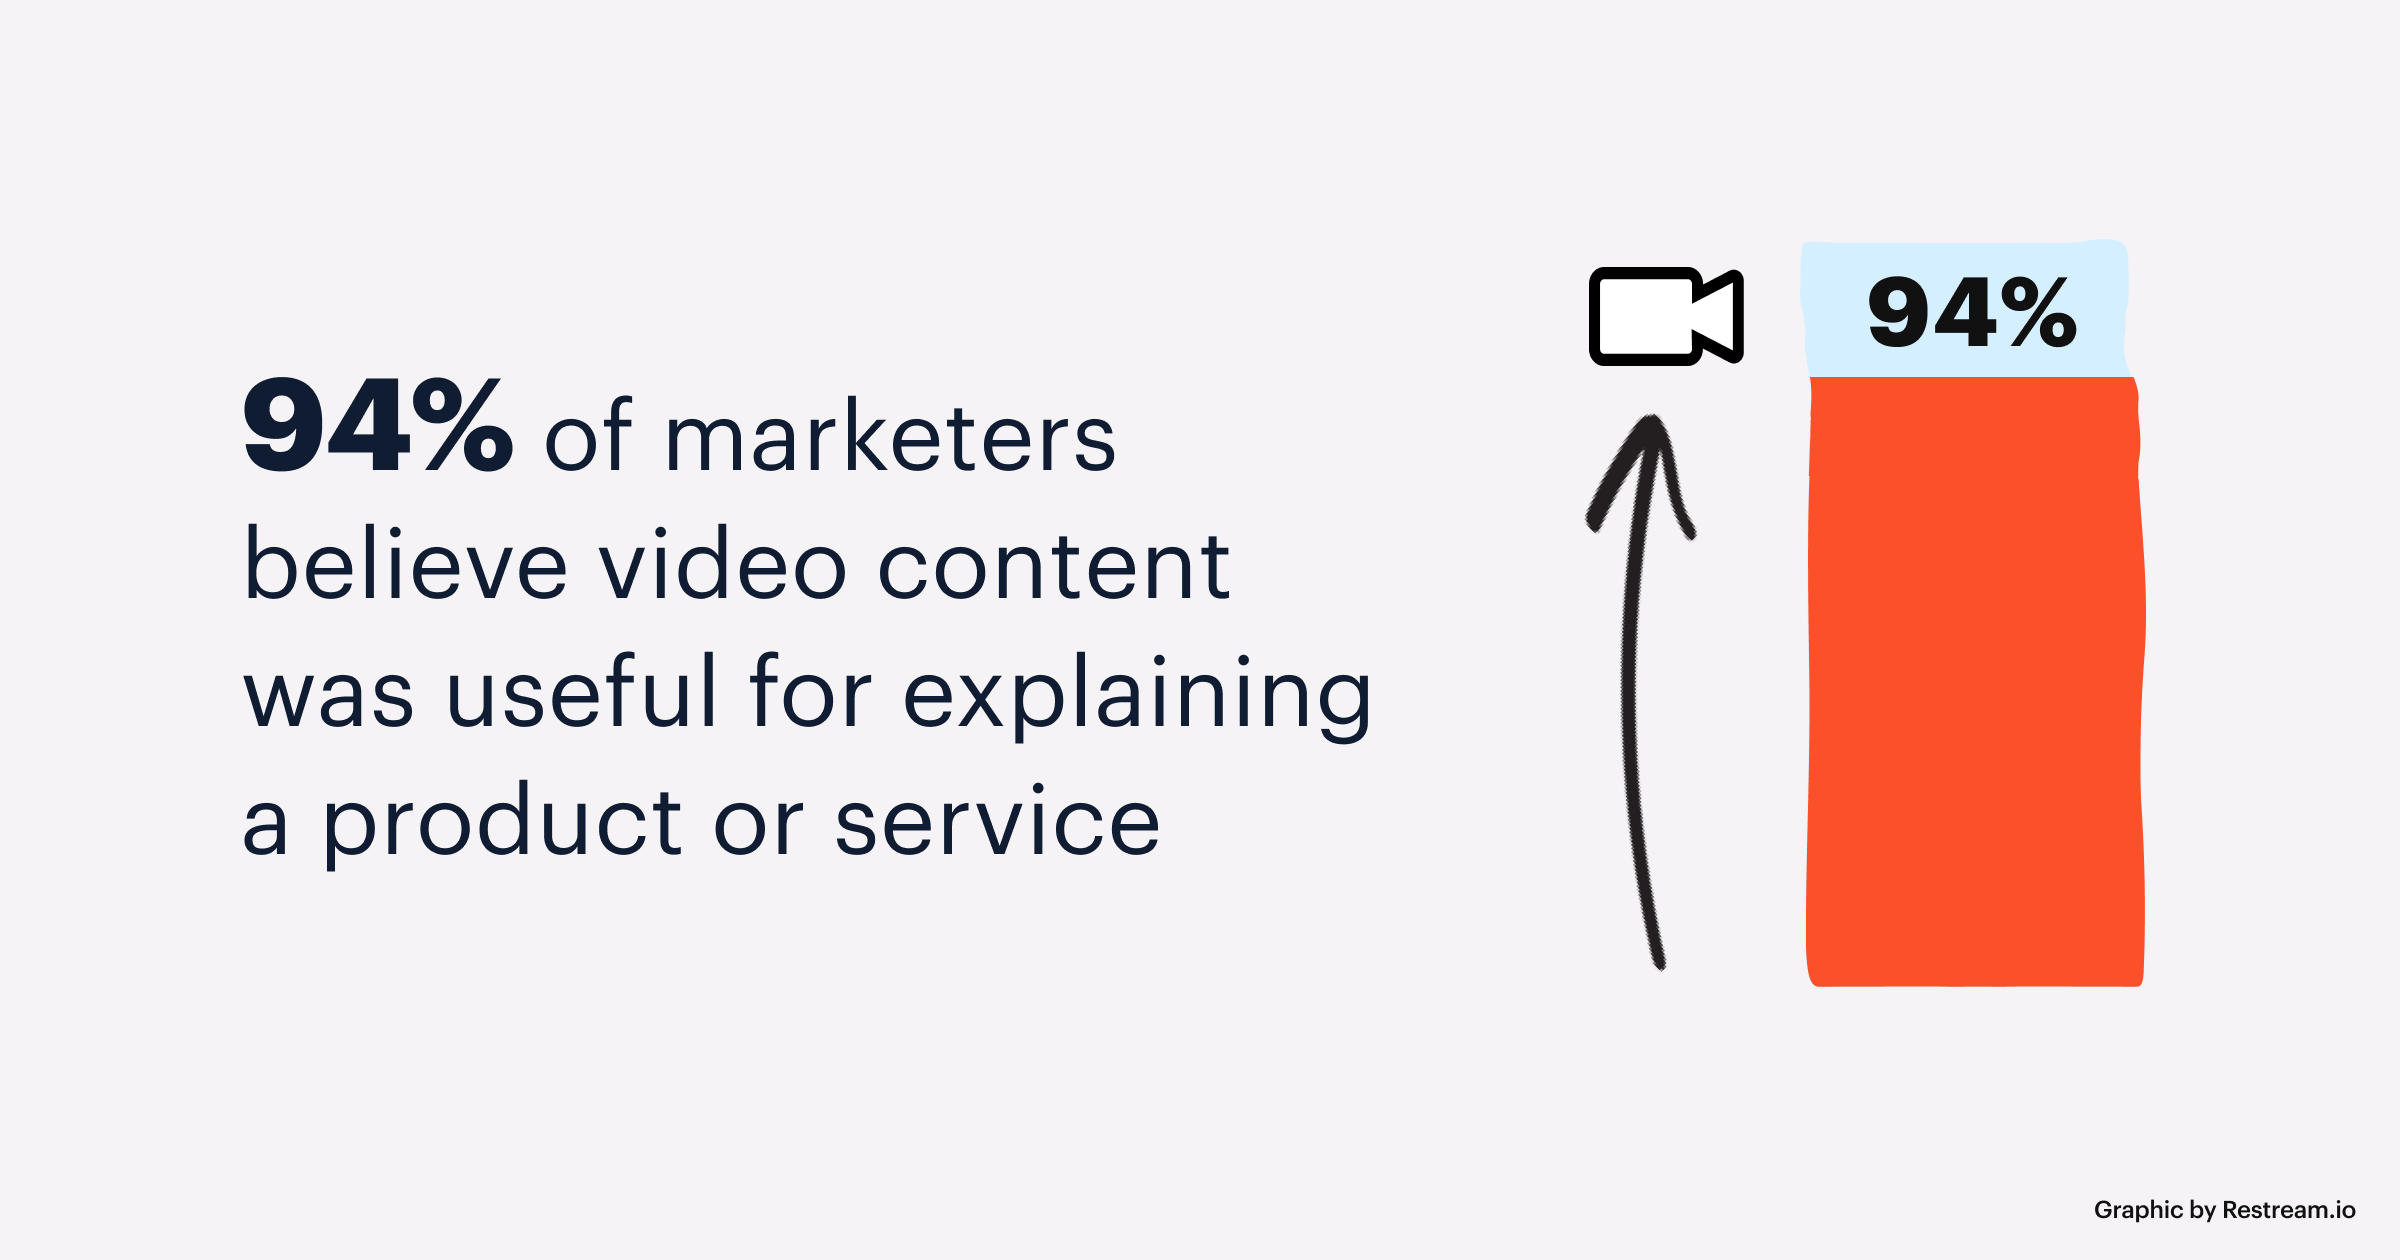 94% of marketers believe video content was useful for explaining a product or service